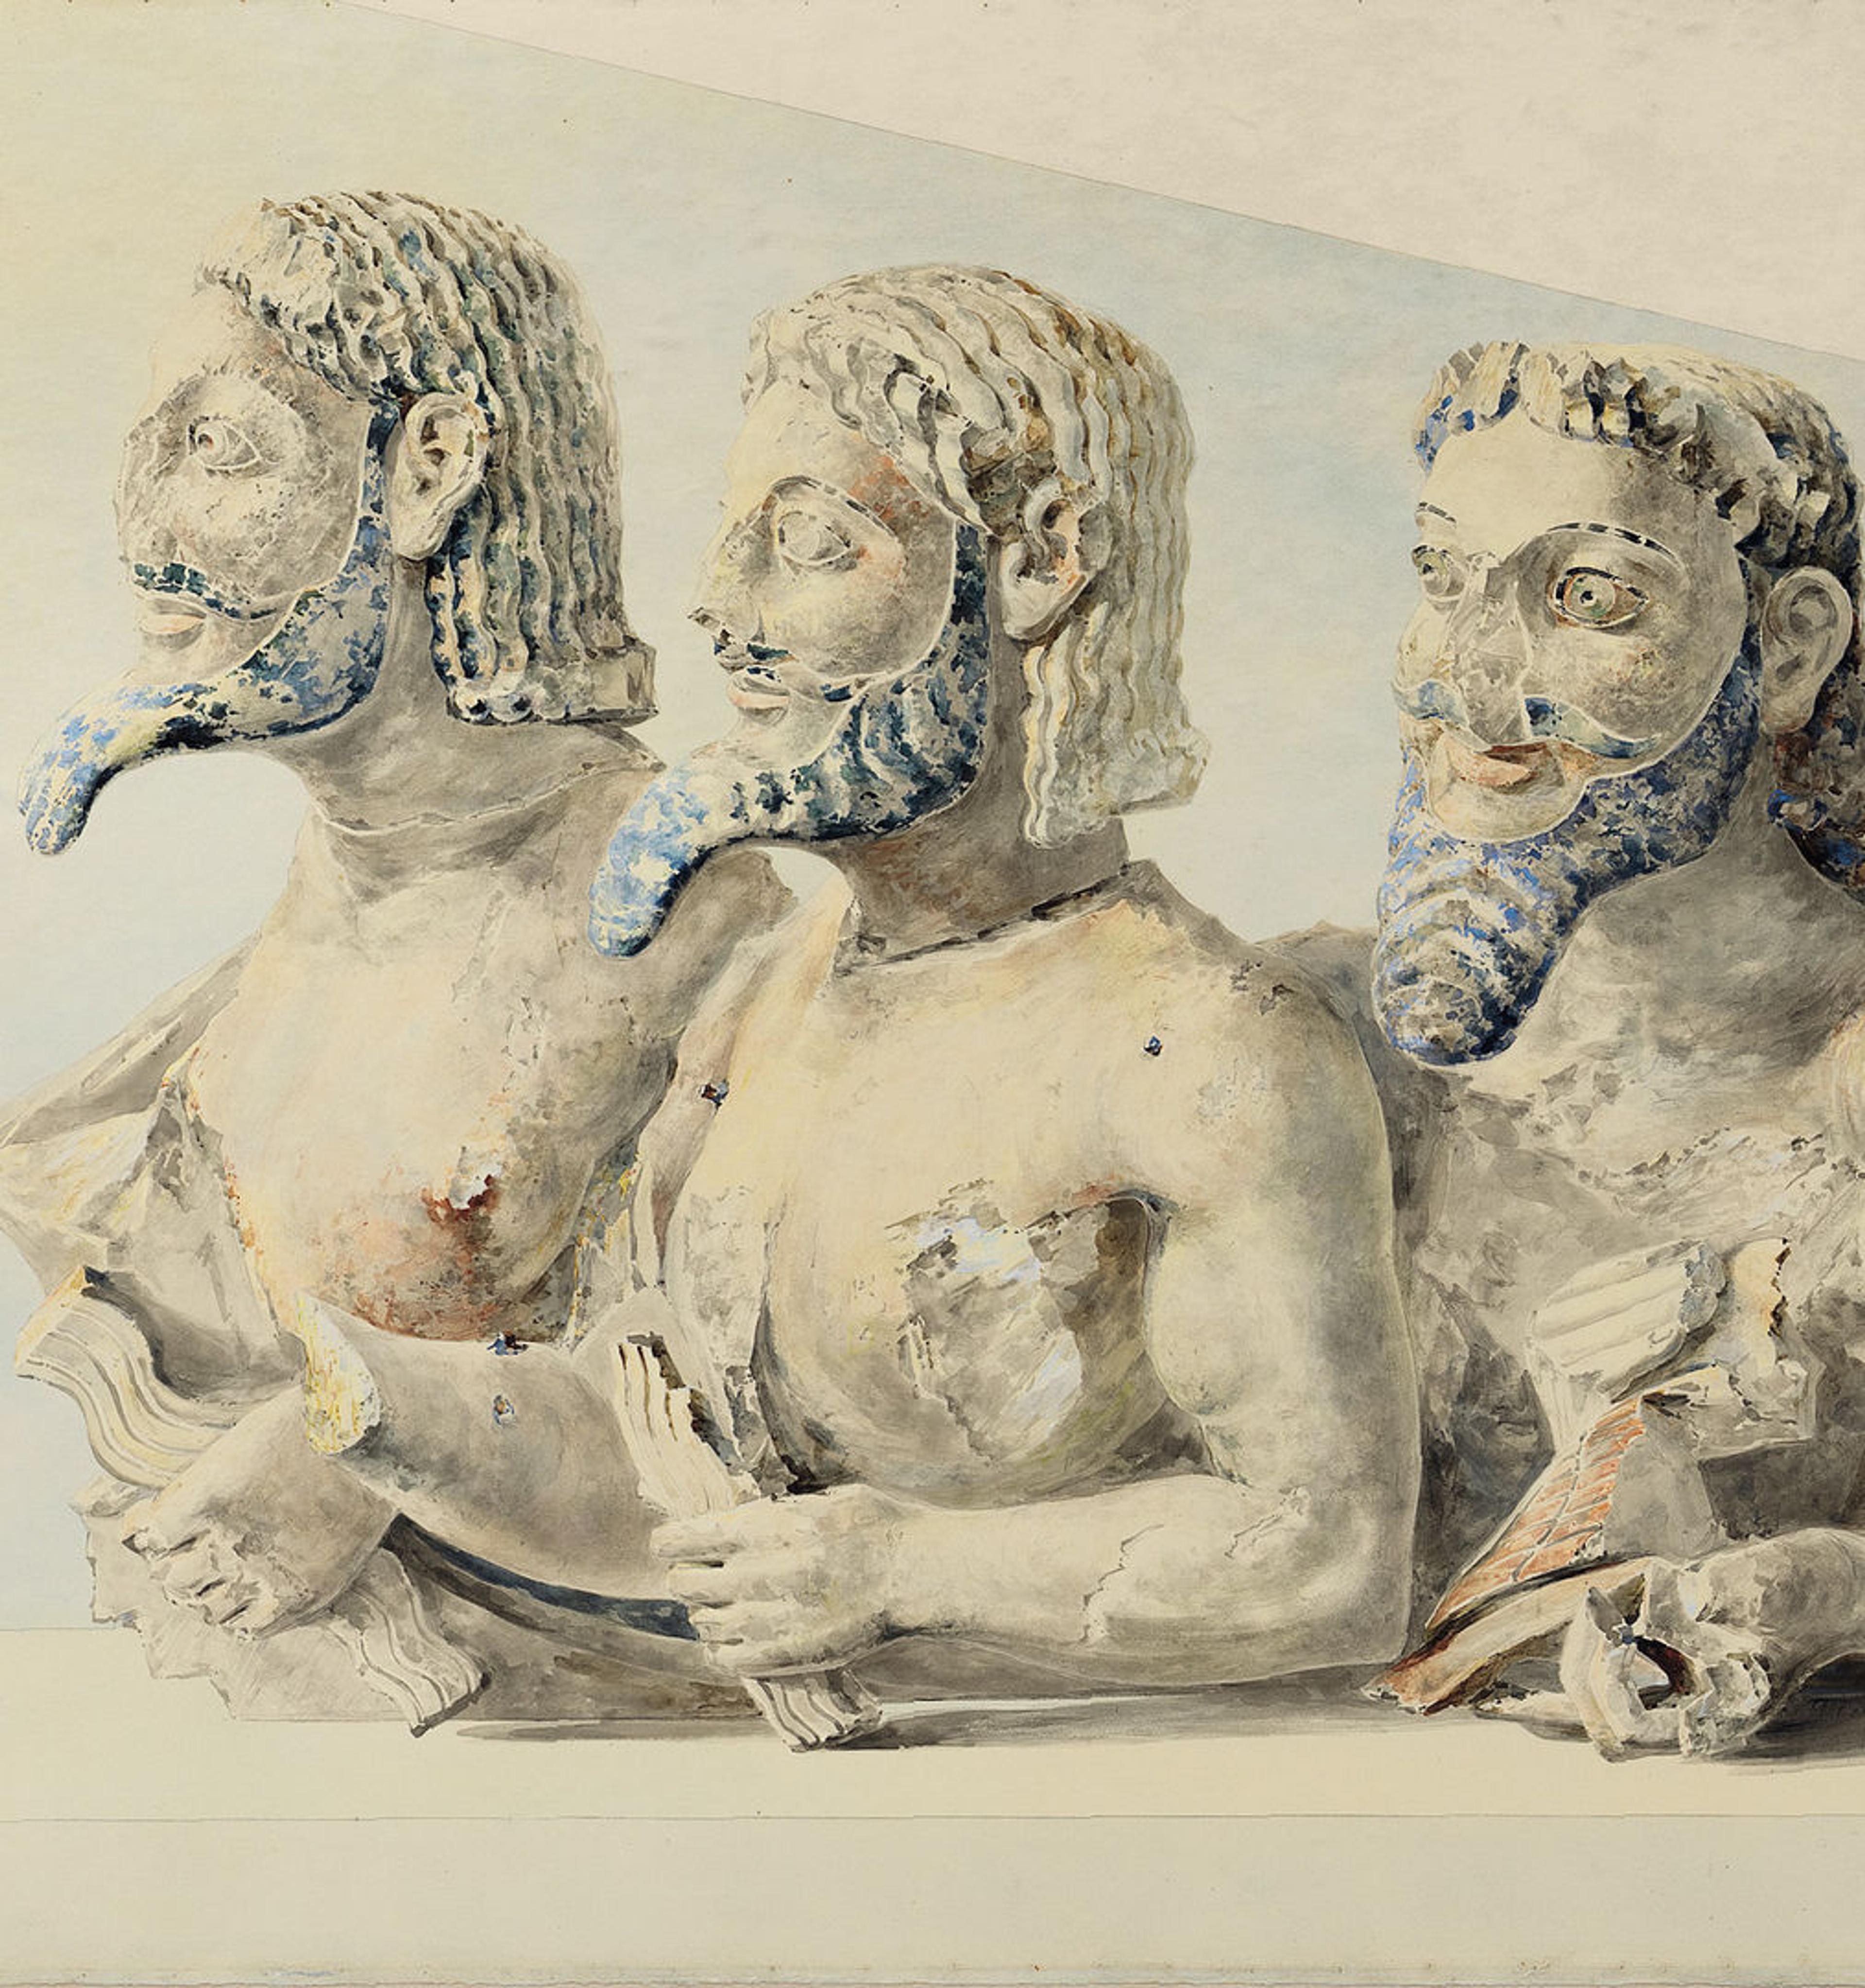 A watercolor depicting three men in profile, each with a long, bluish beard